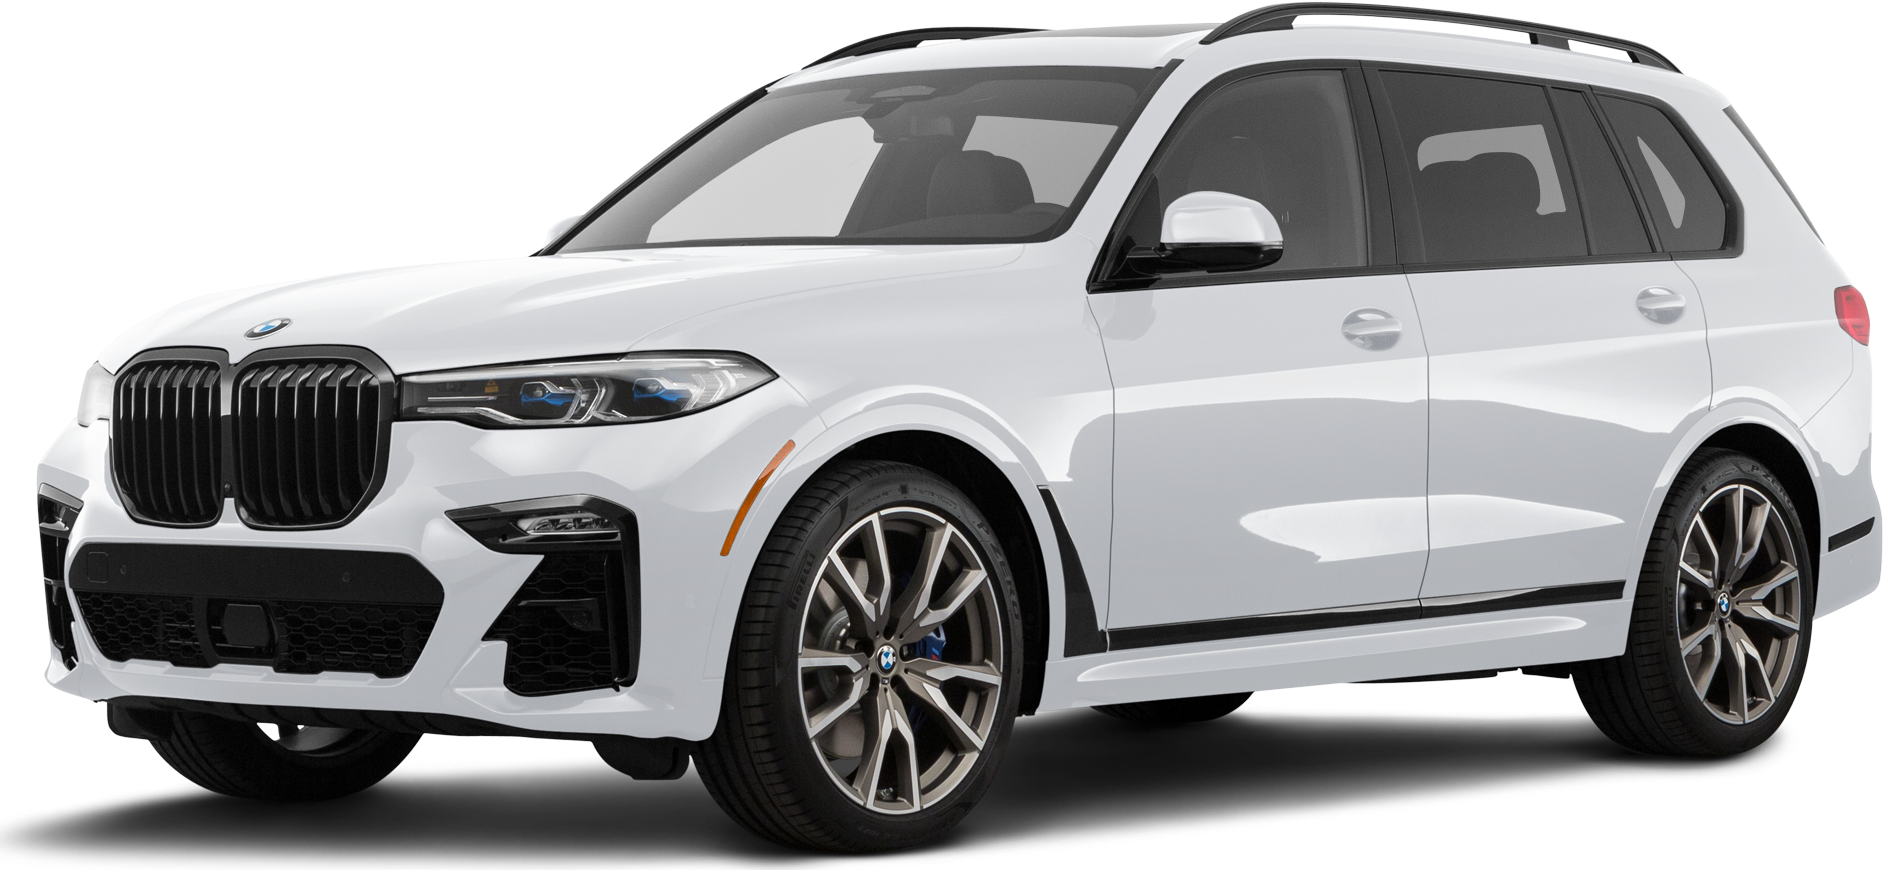 2020 BMW X7 Values & Cars for Sale | Kelley Blue Book